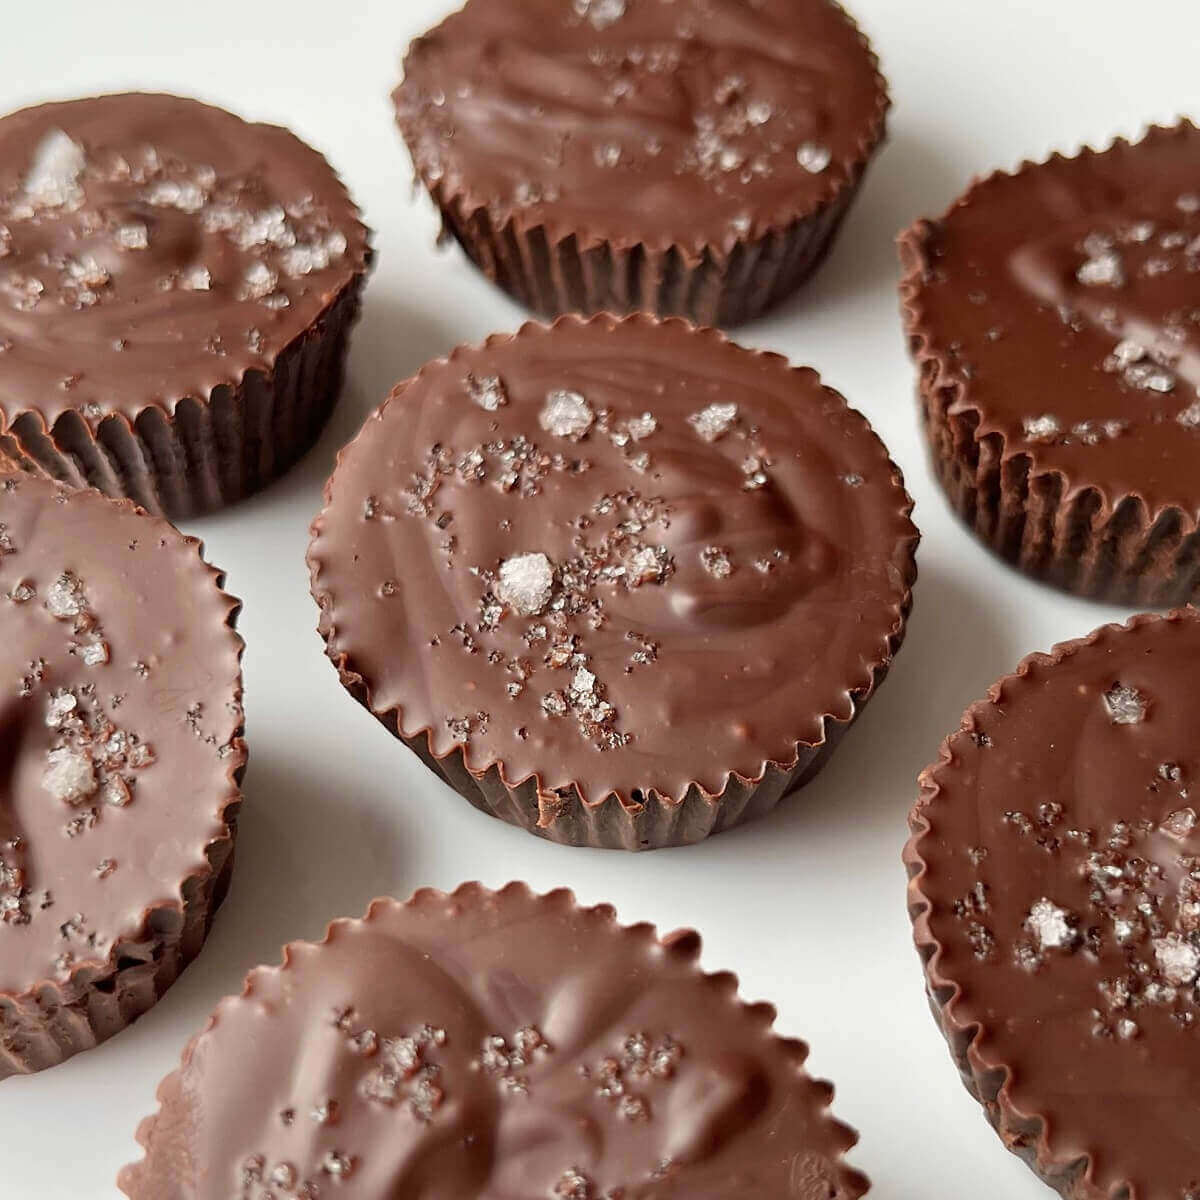 No-bake chocolate peanut butter cups on a white plate.